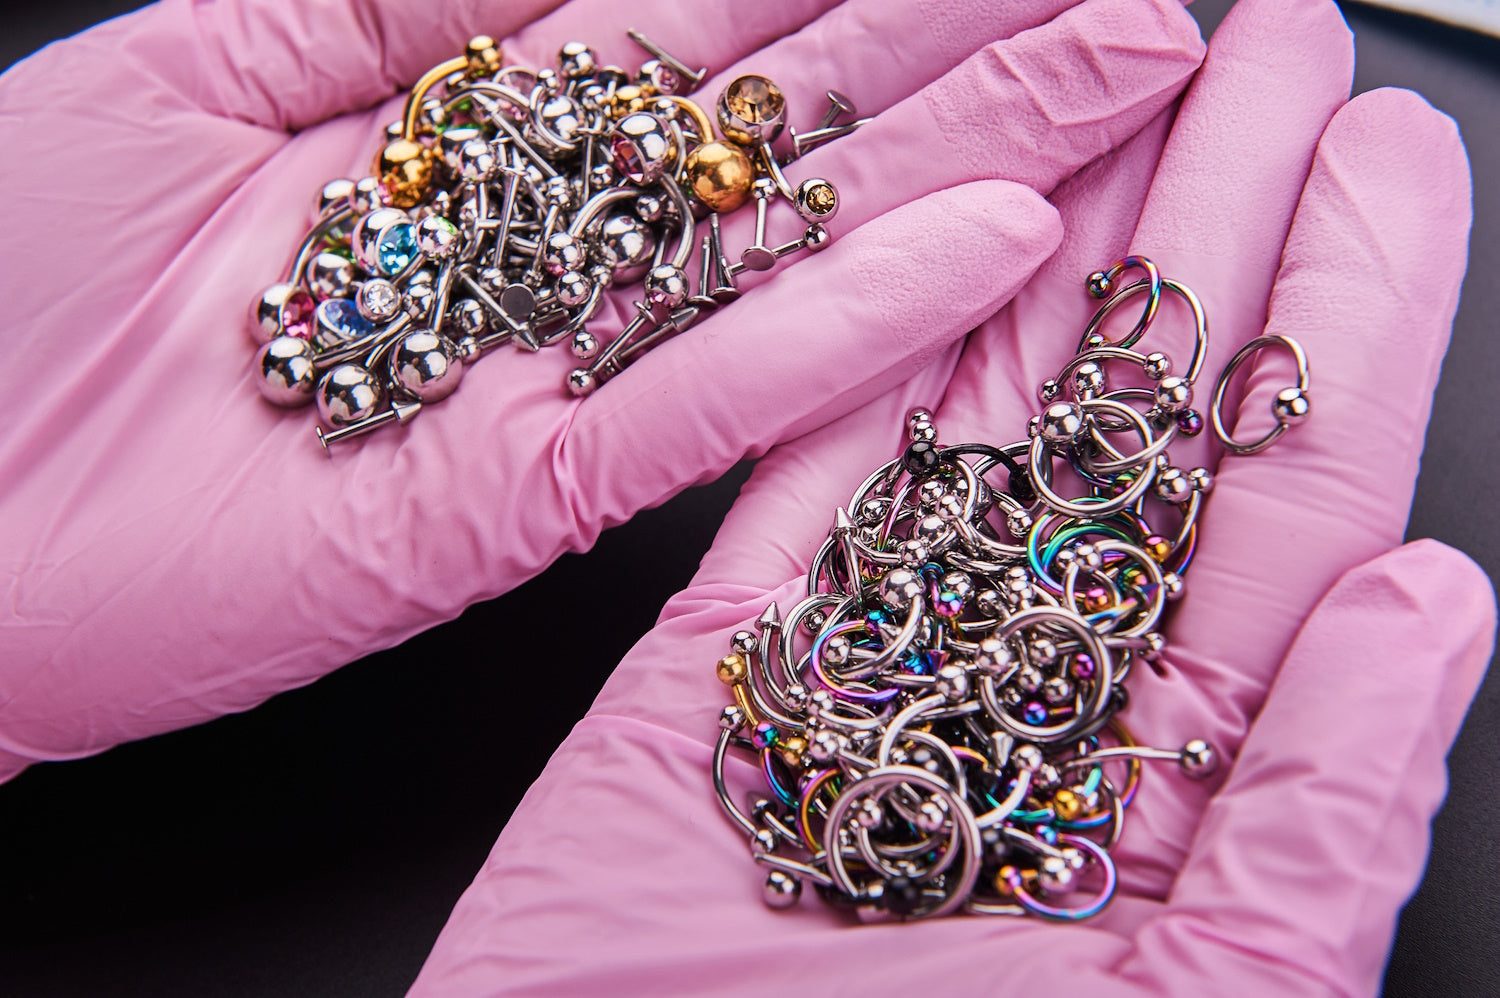 A person with pink gloves on that has many pieces of body piercing jewelry in her hands including titanium and gold pieces.